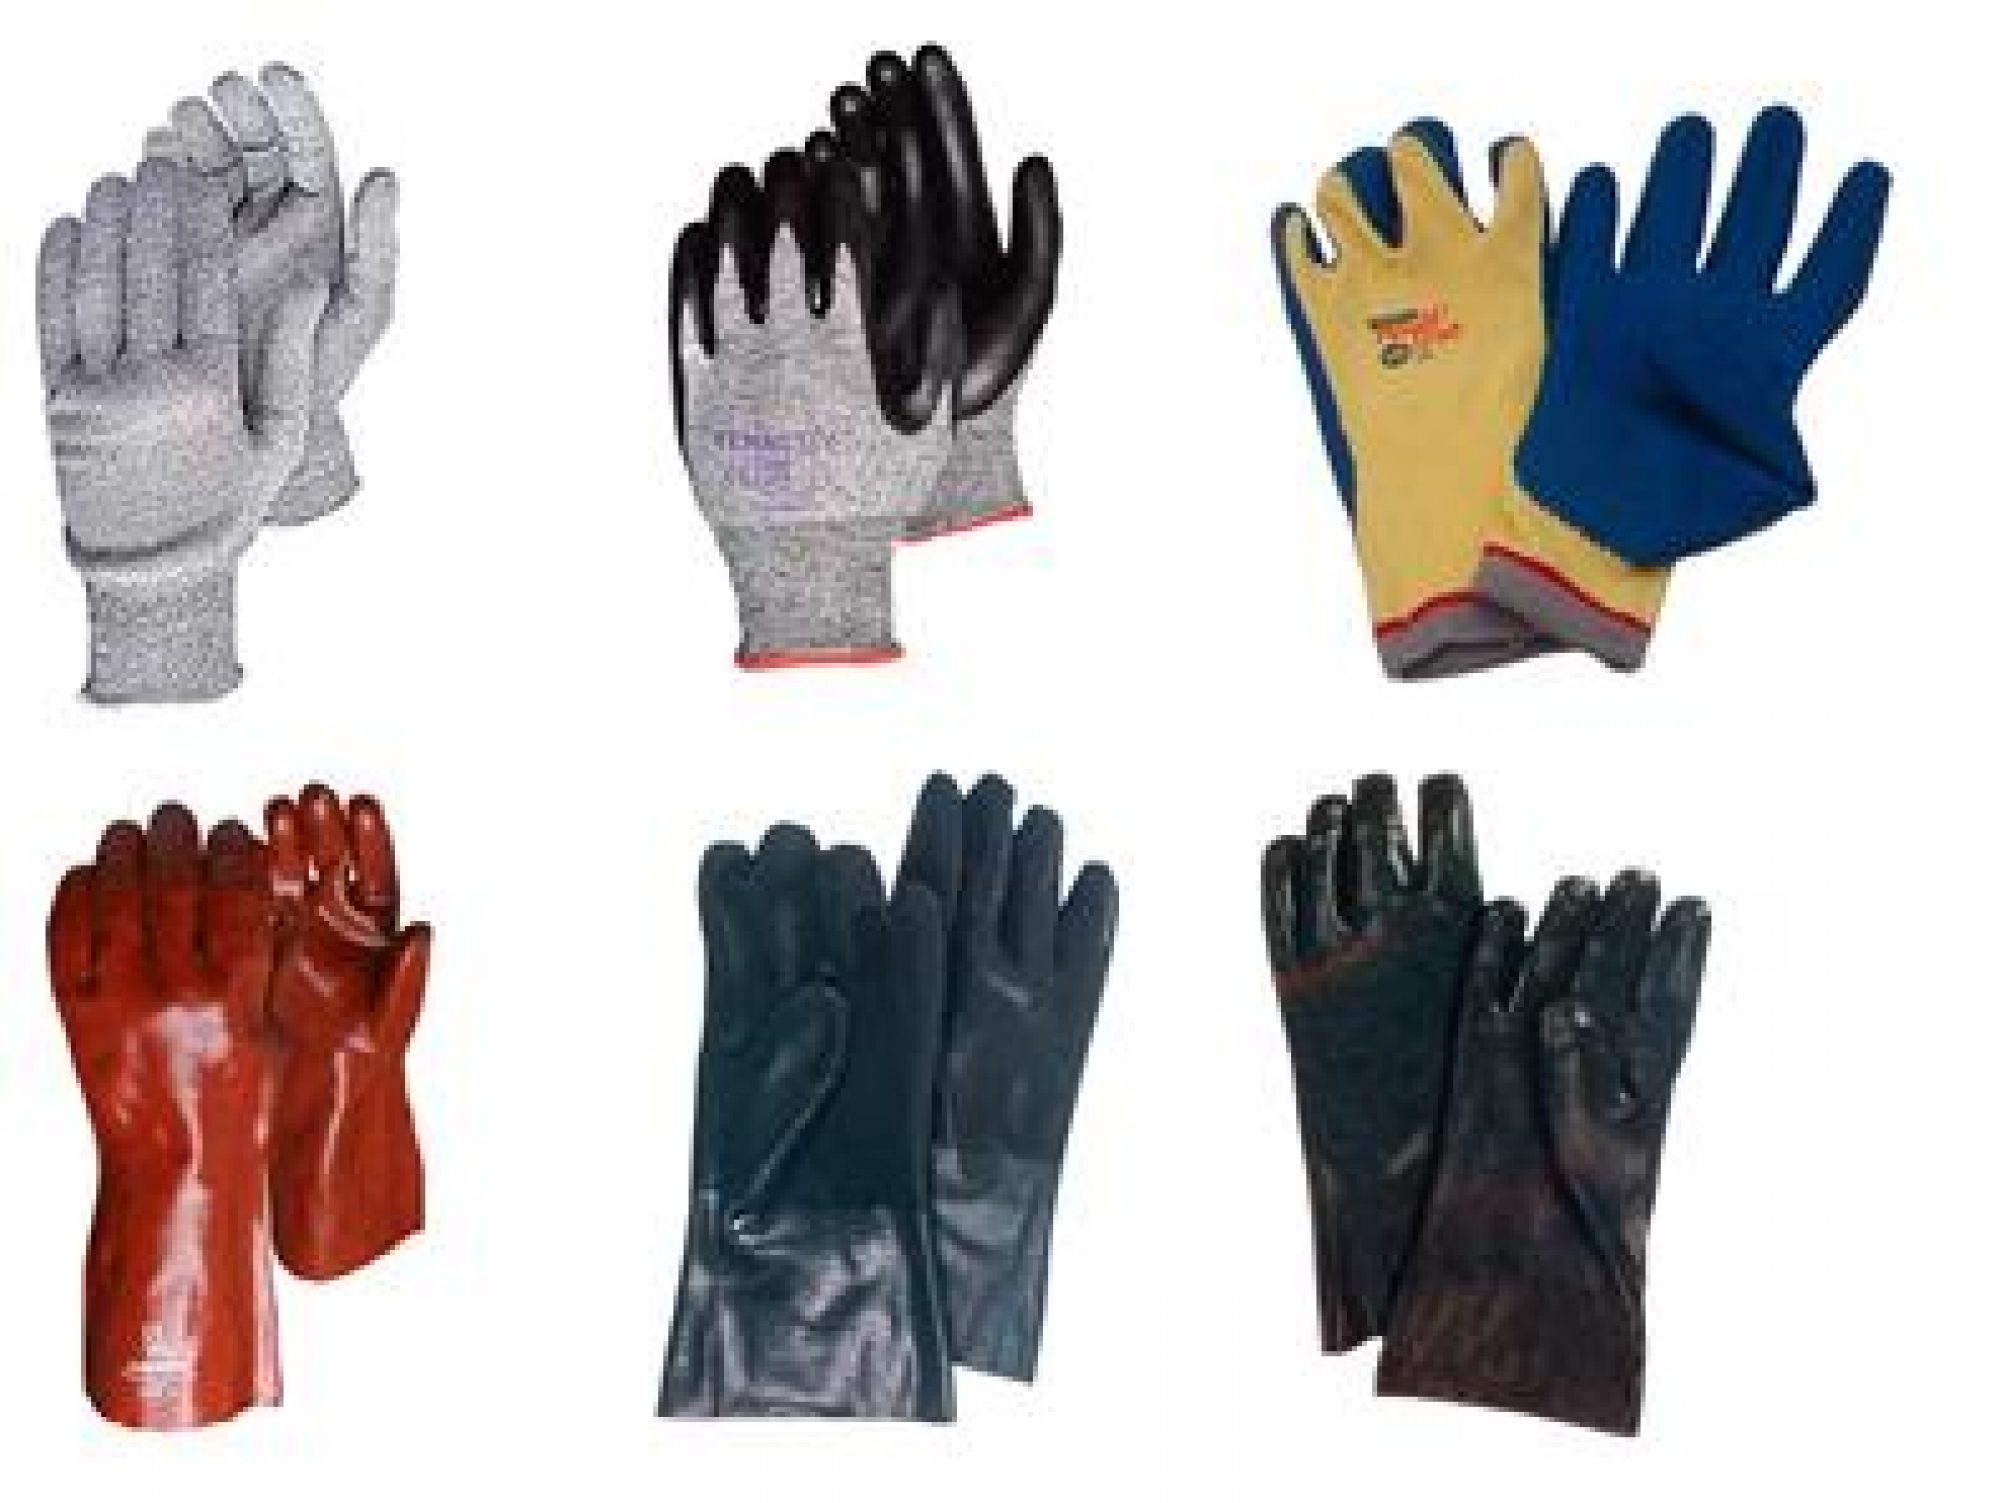 The codex of coated knitting gloves.